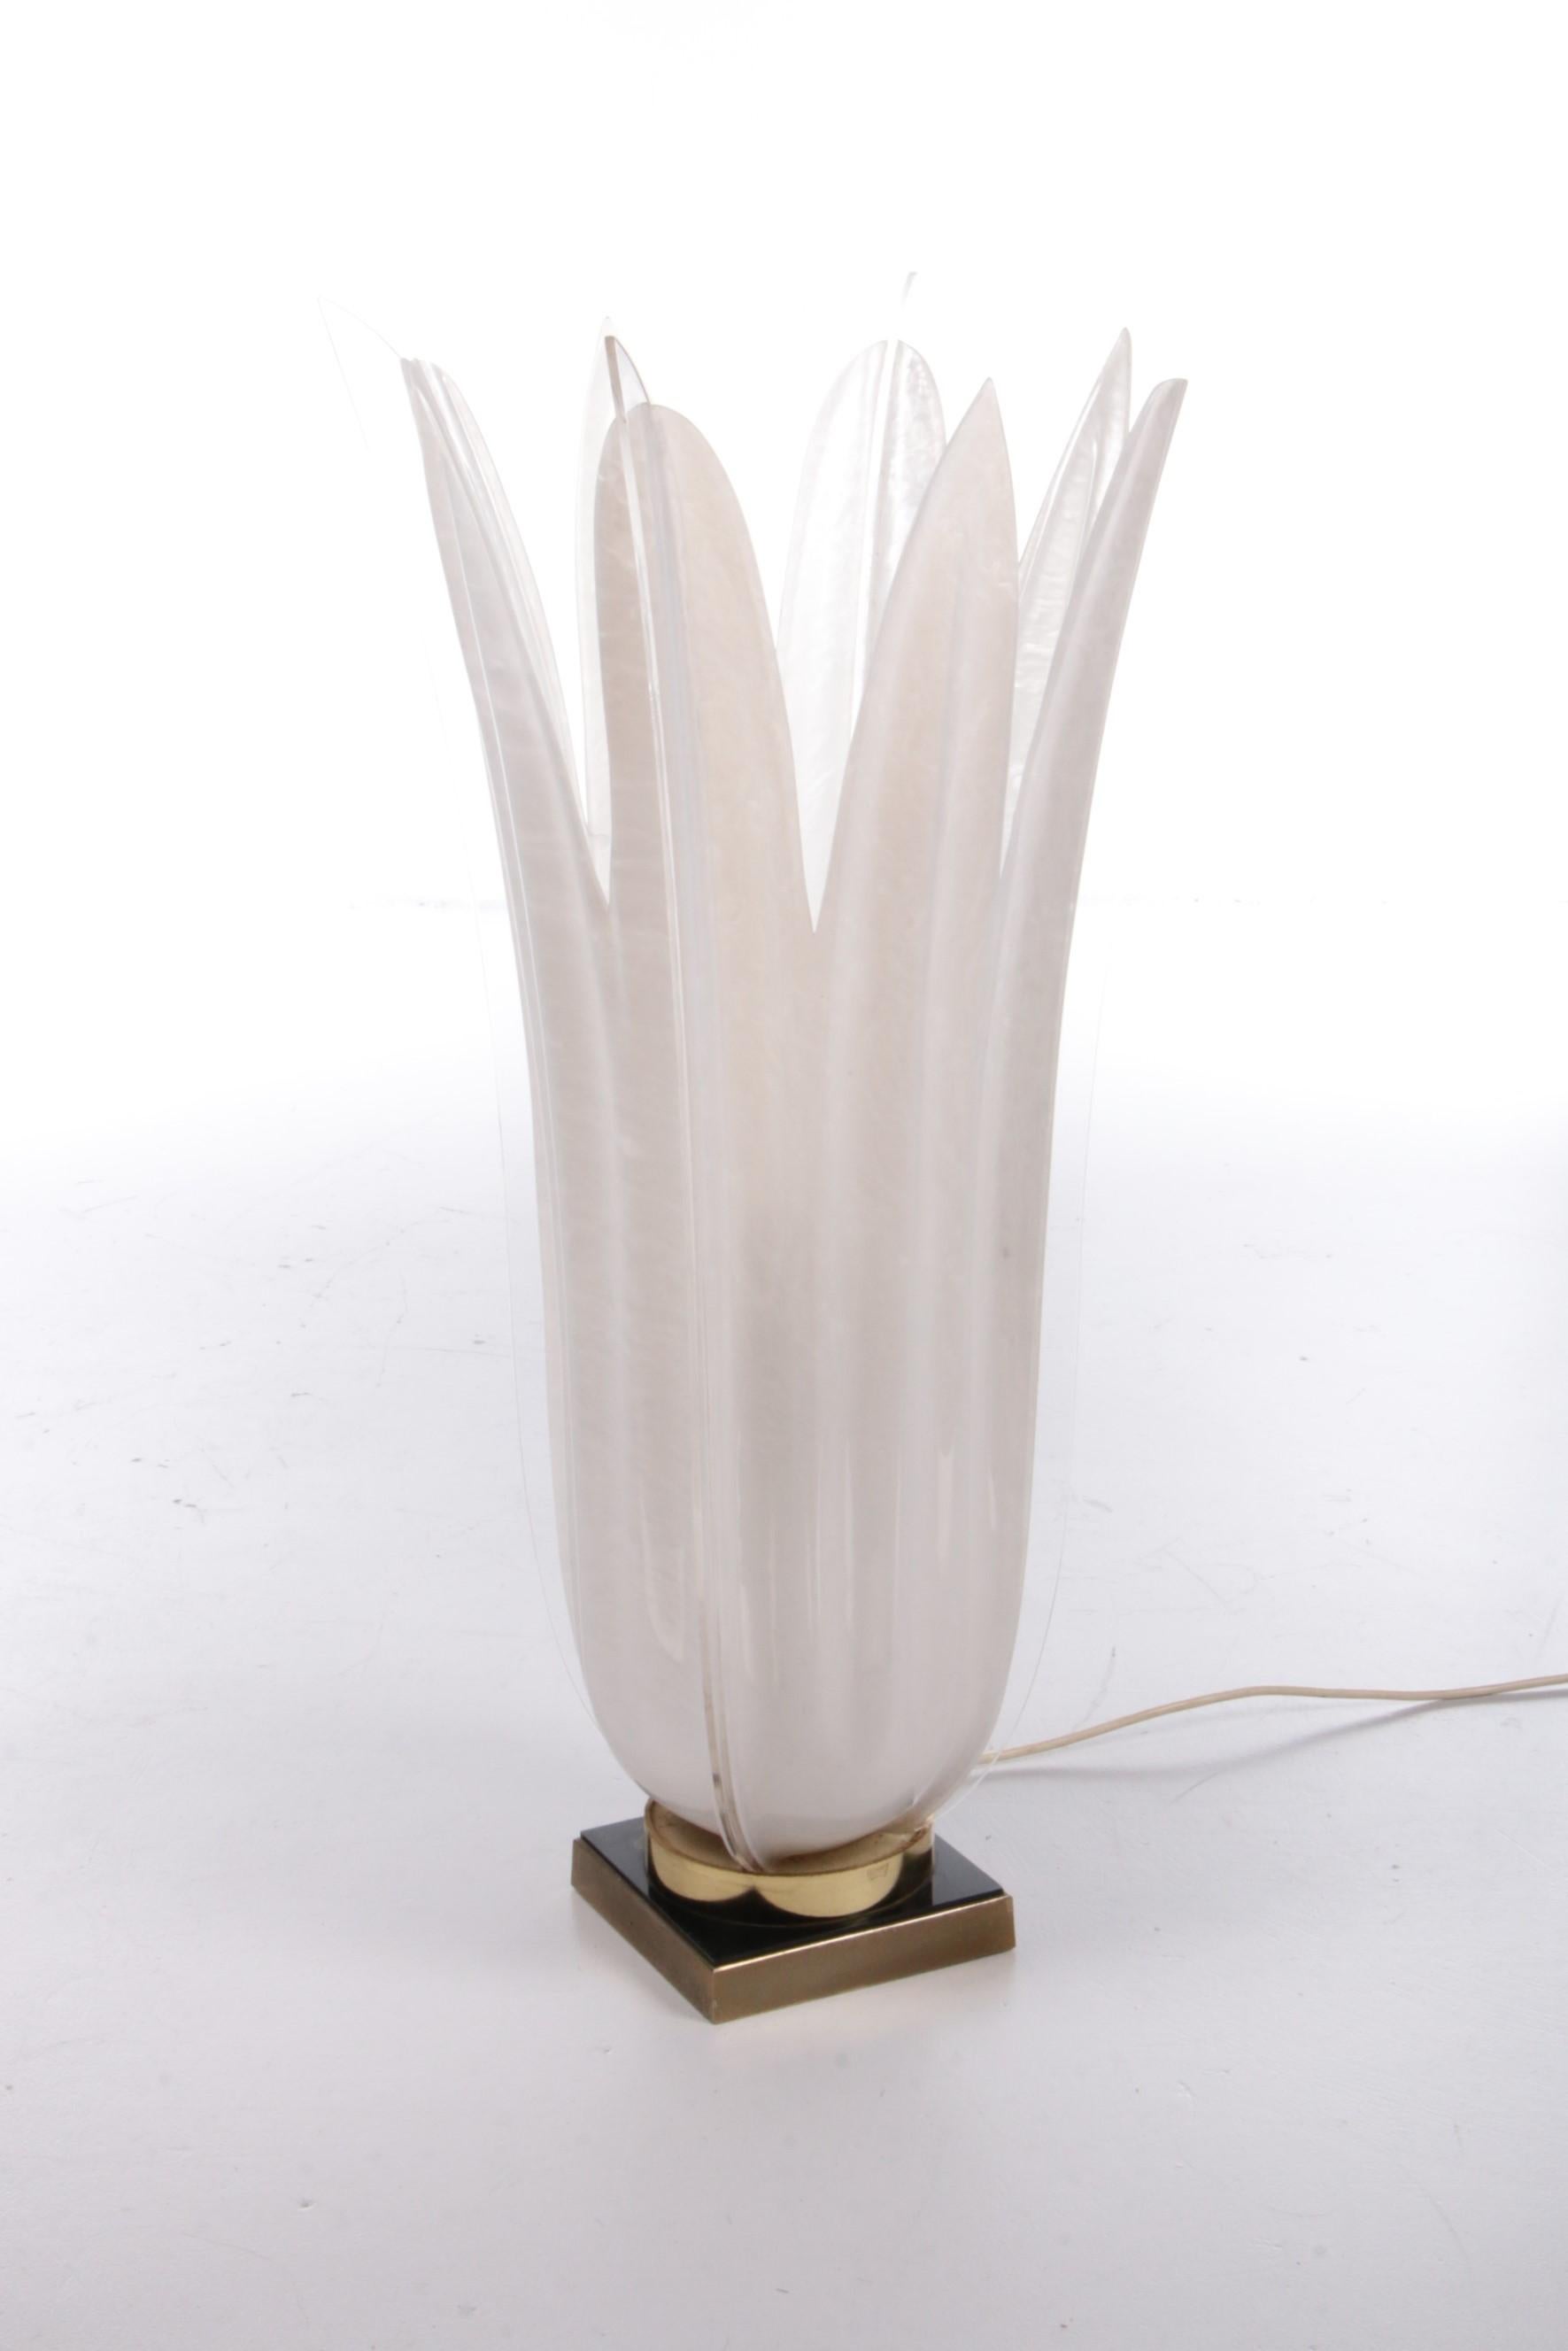 Canadian Roger Rougier Tulip lamp, 1970s

This is an exceptionally beautiful table lamp inspired by a tulip, made by Rougier in the 1970s.

The 7 blades are made of PMMA opaline and they are mounted on a brass base.

We are very happy to have